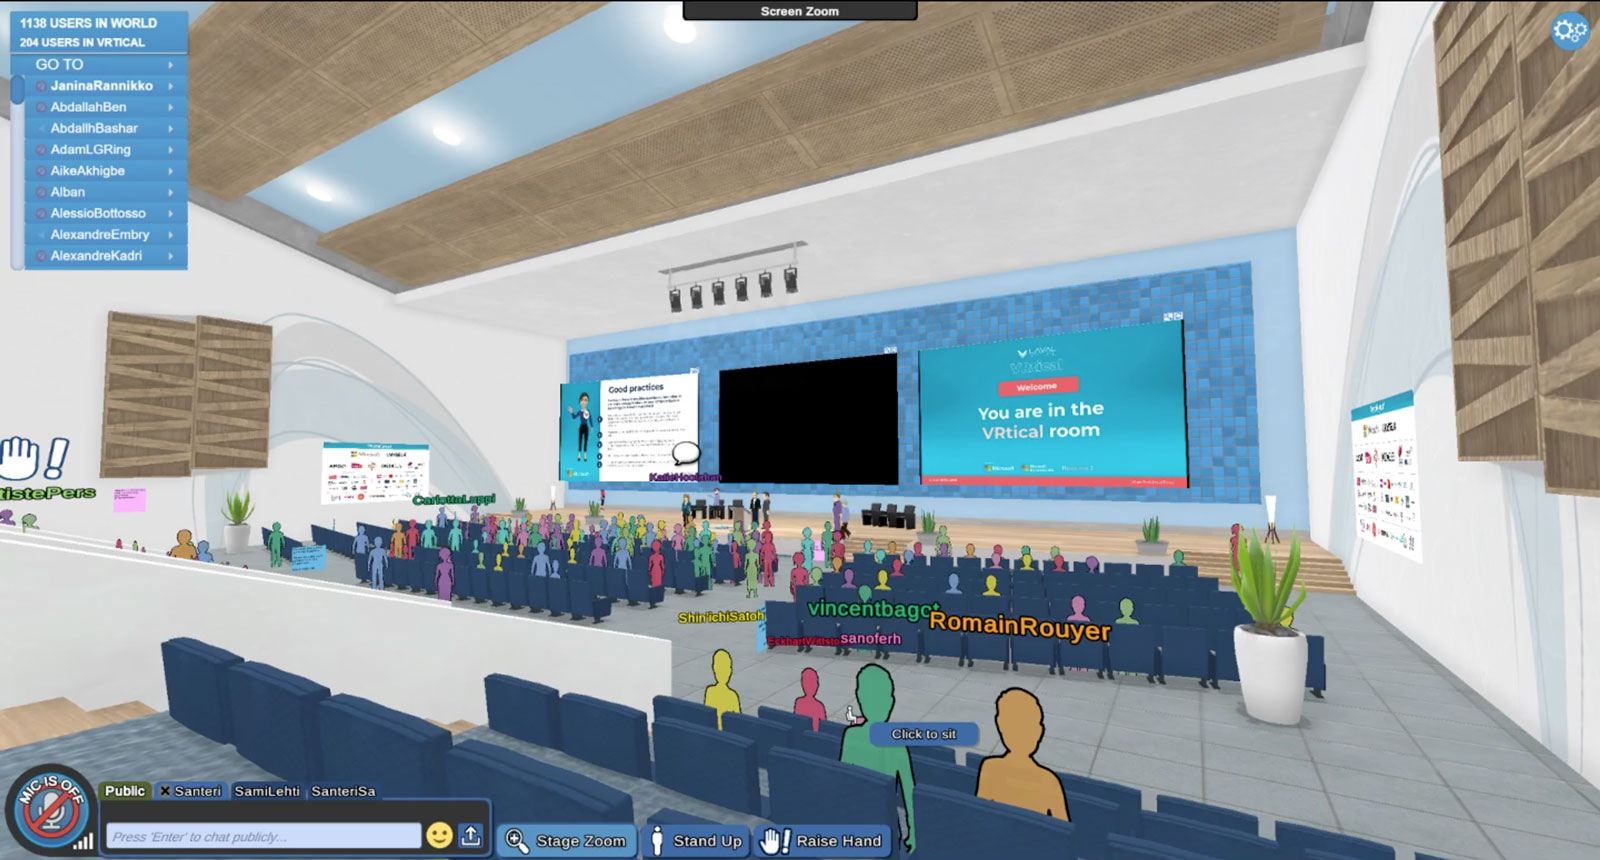 A screen shot of Laval Virtual World 2020 conference's big event hall: VRtical. The hall is half filled with people.